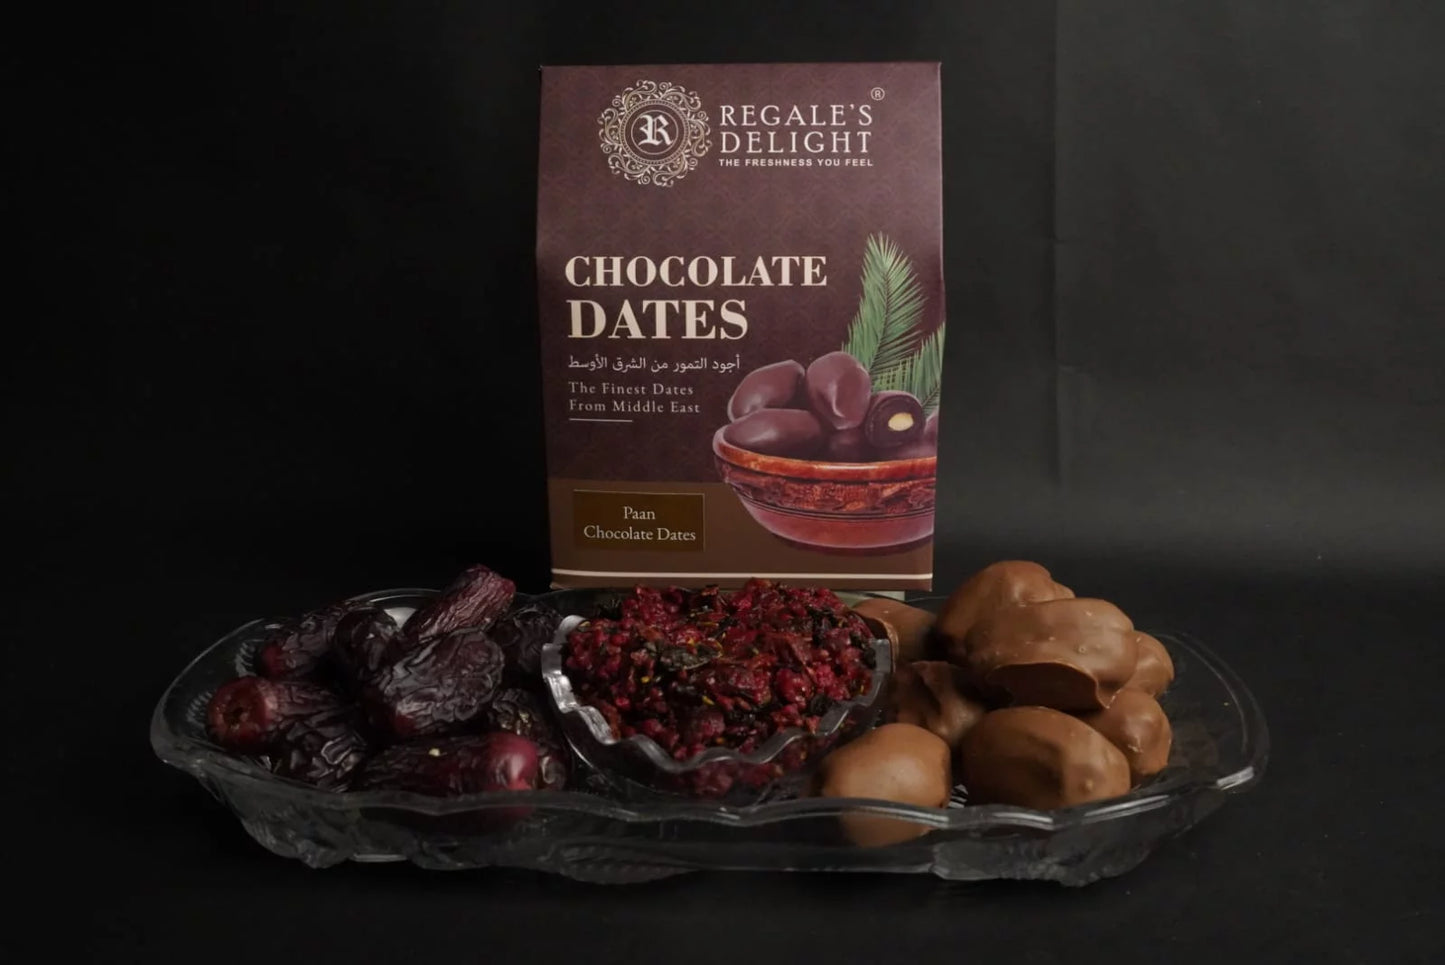 Chocolate dates with paan | Regales Delight